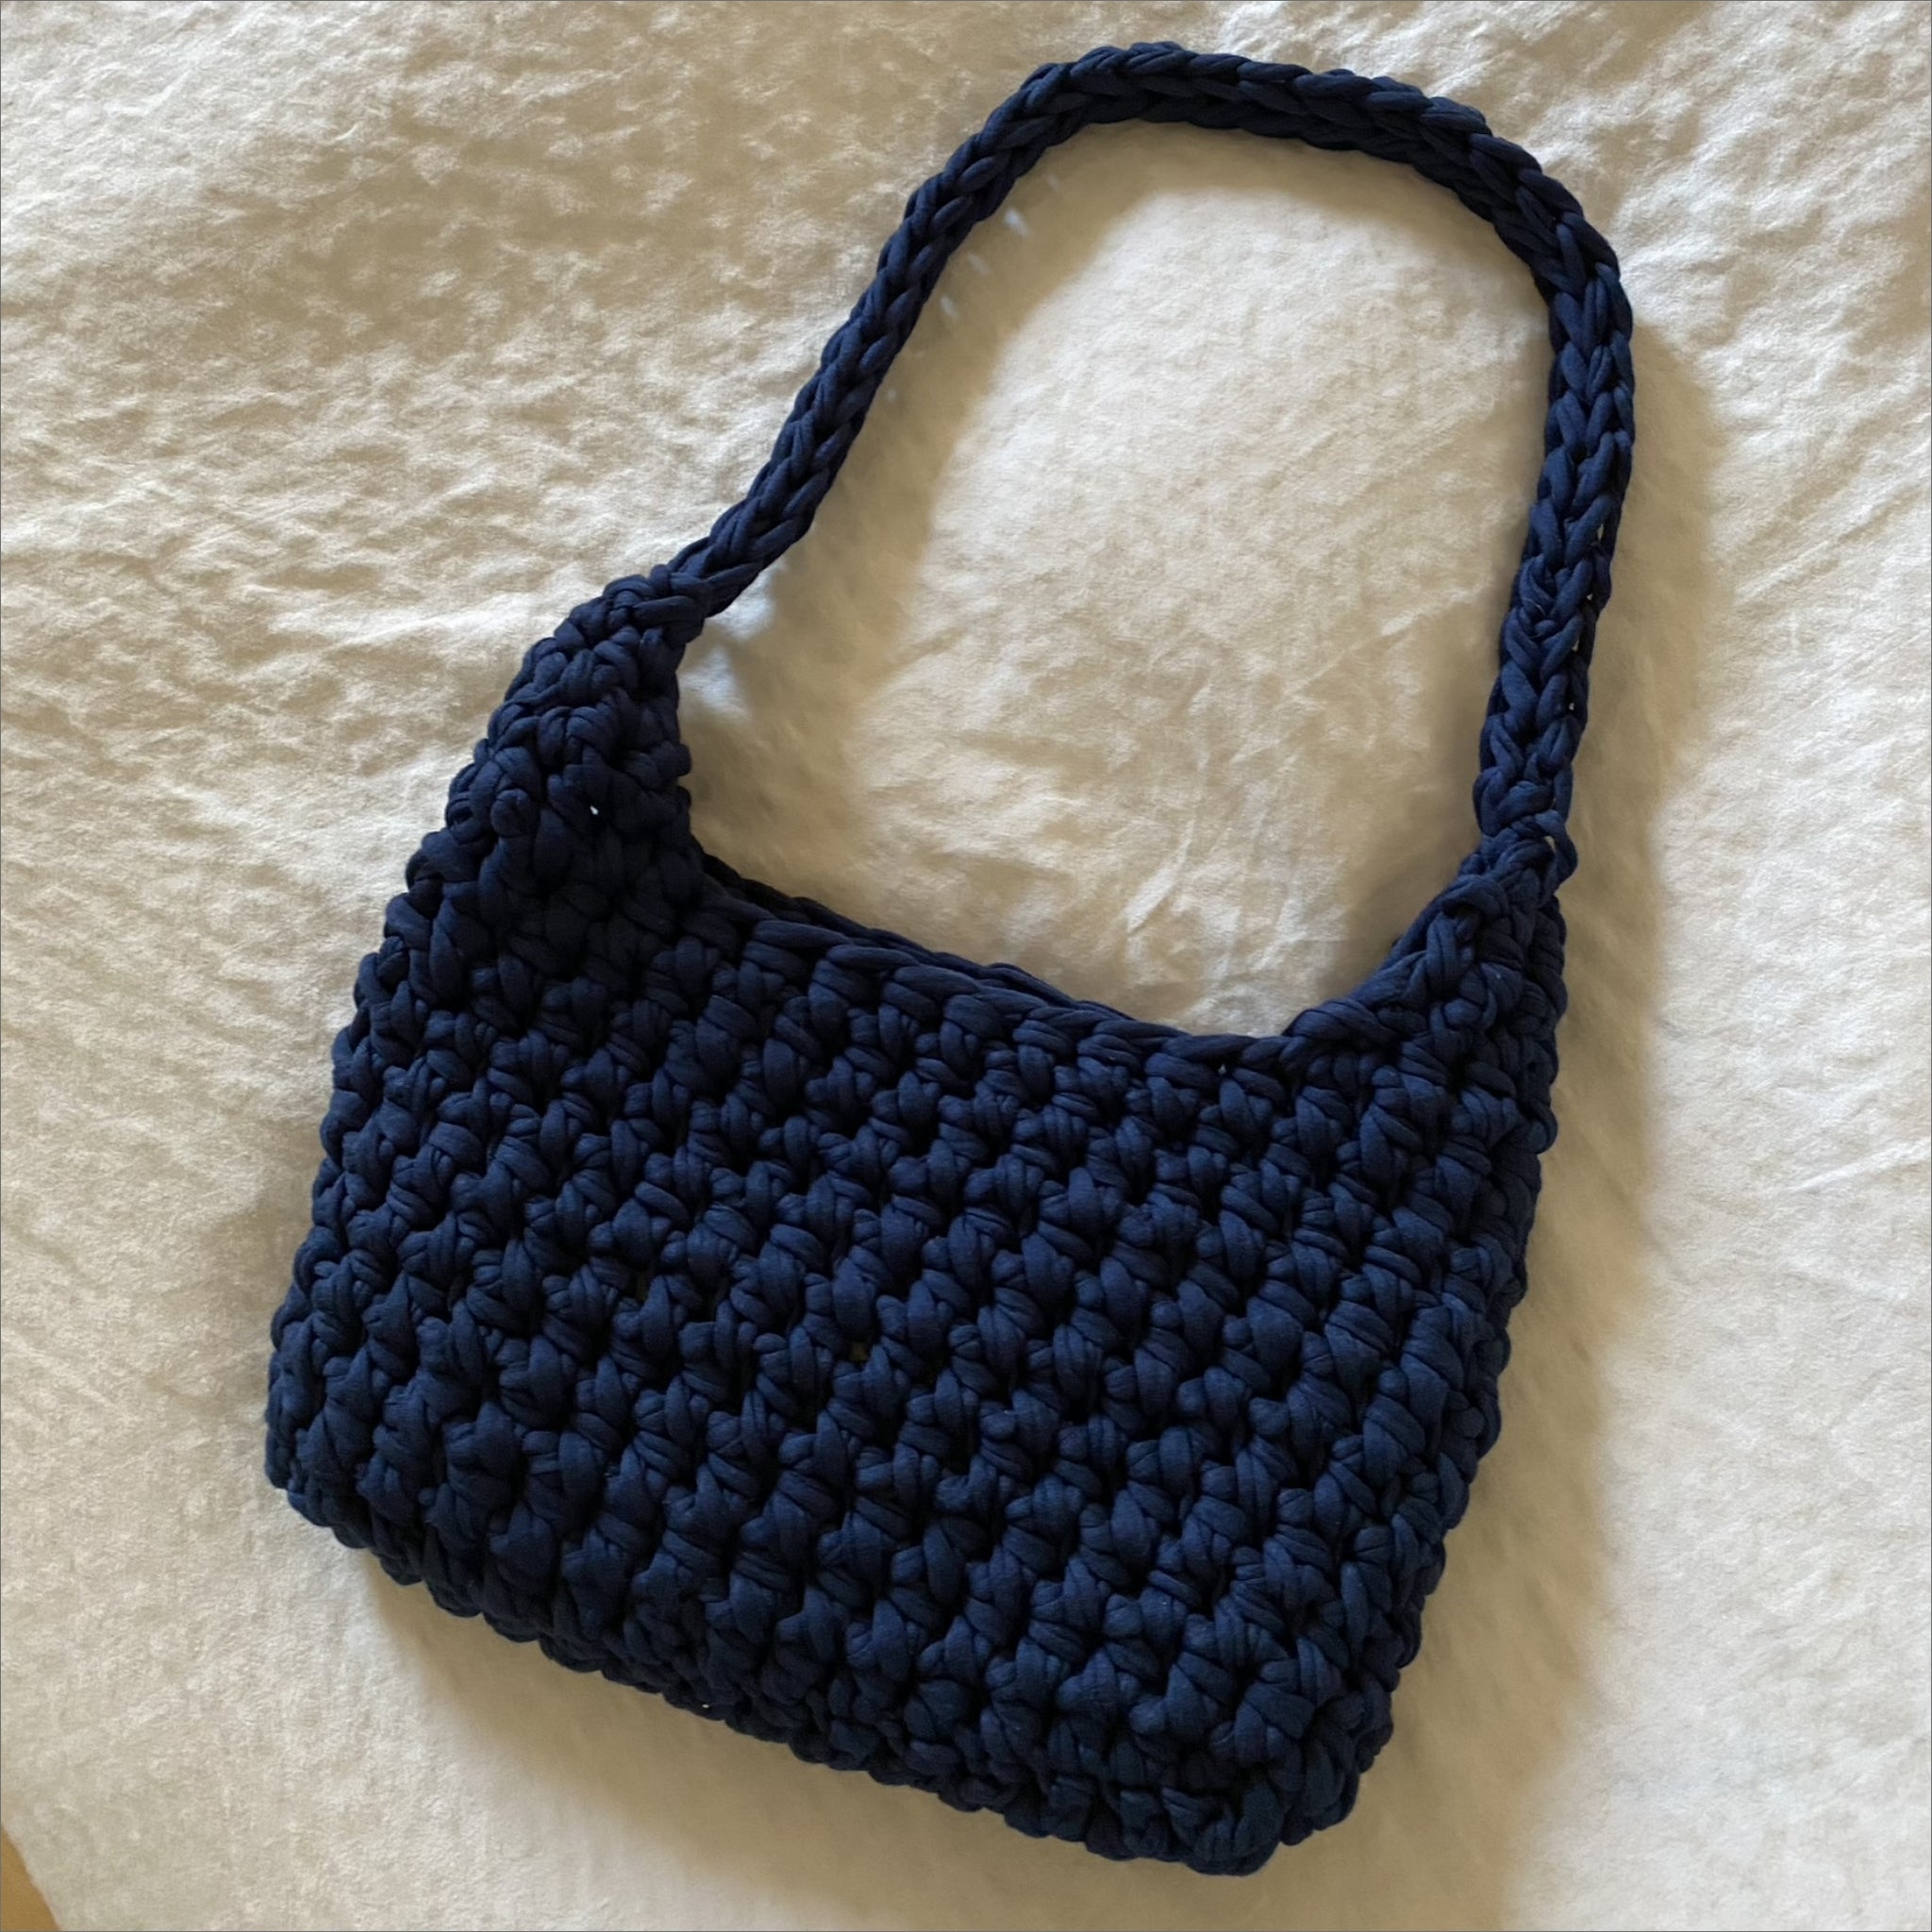 Small Crochet Purse Pattern Crochet Bag With Fold Over Flap and Metal Chain  the Cassidy Bag - Etsy